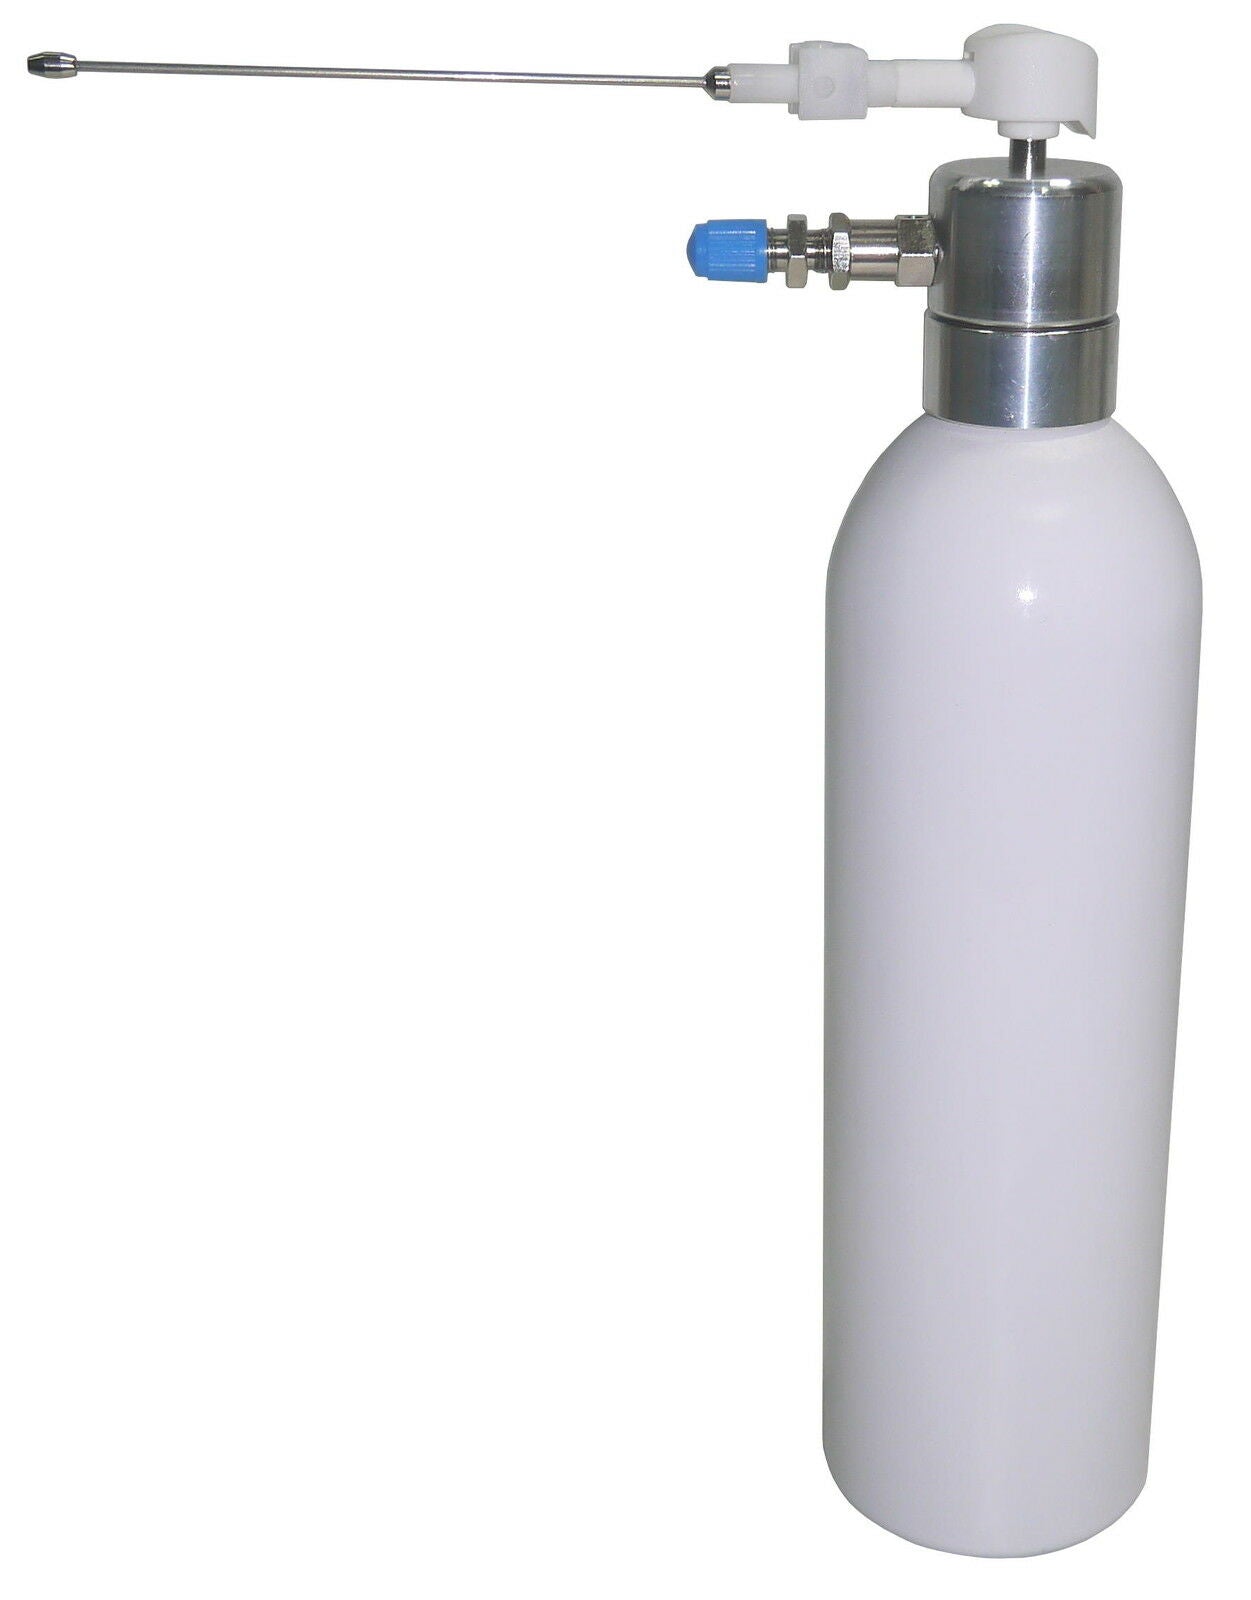 Pressurised Refillable Stainless Steel Spray Bottle - Professional Quality - Specialist Tools Australia